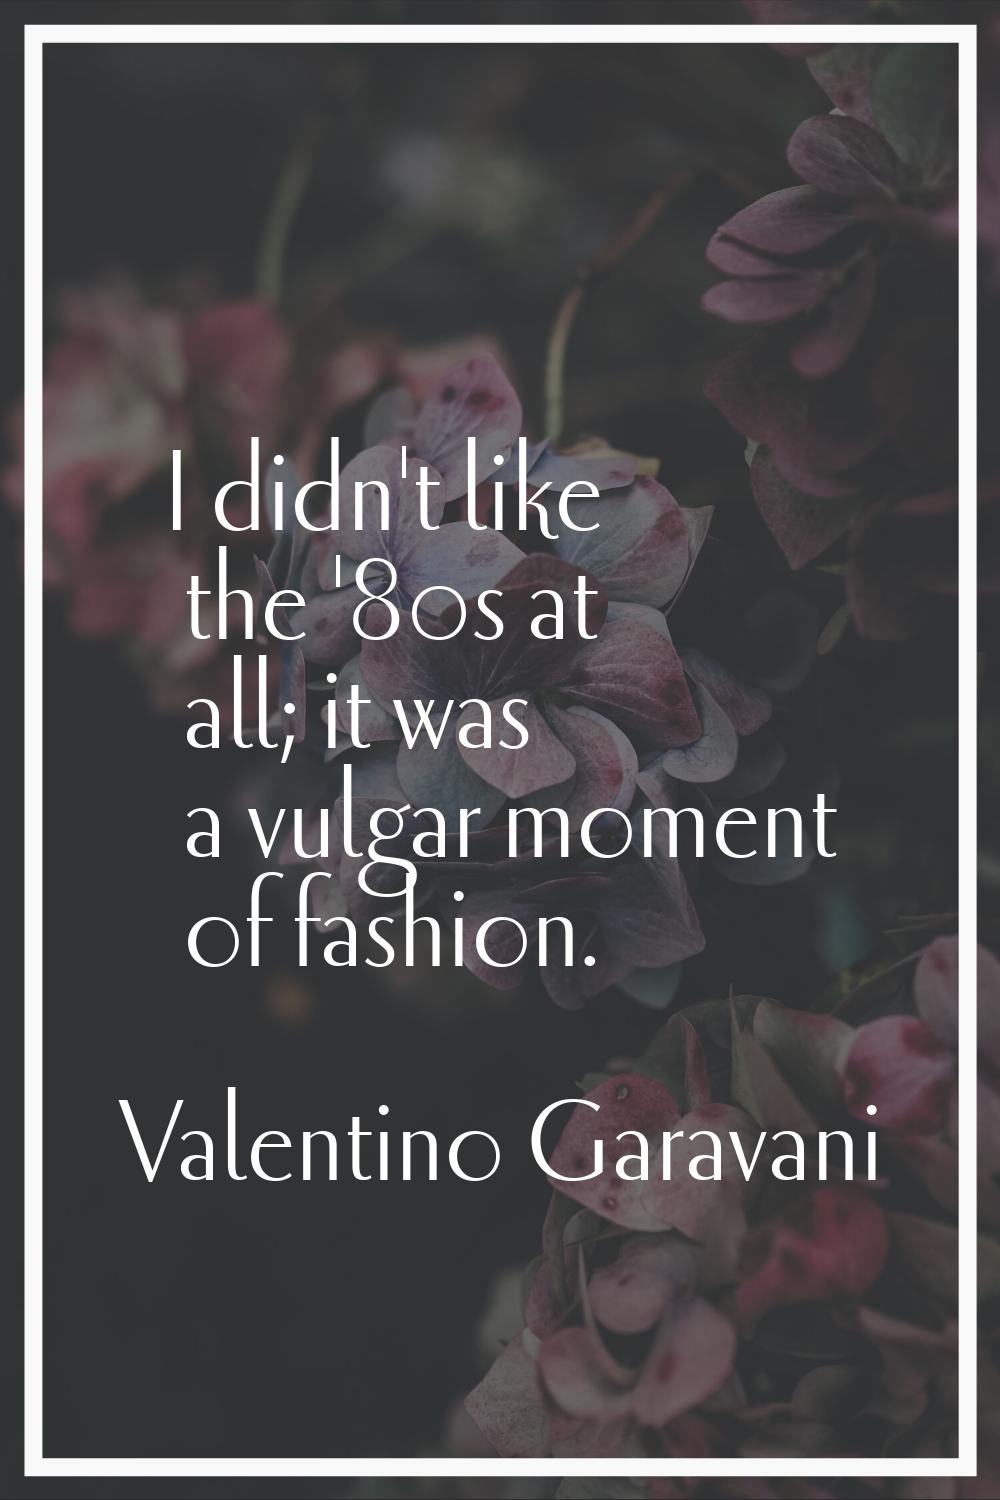 I didn't like the '80s at all; it was a vulgar moment of fashion.